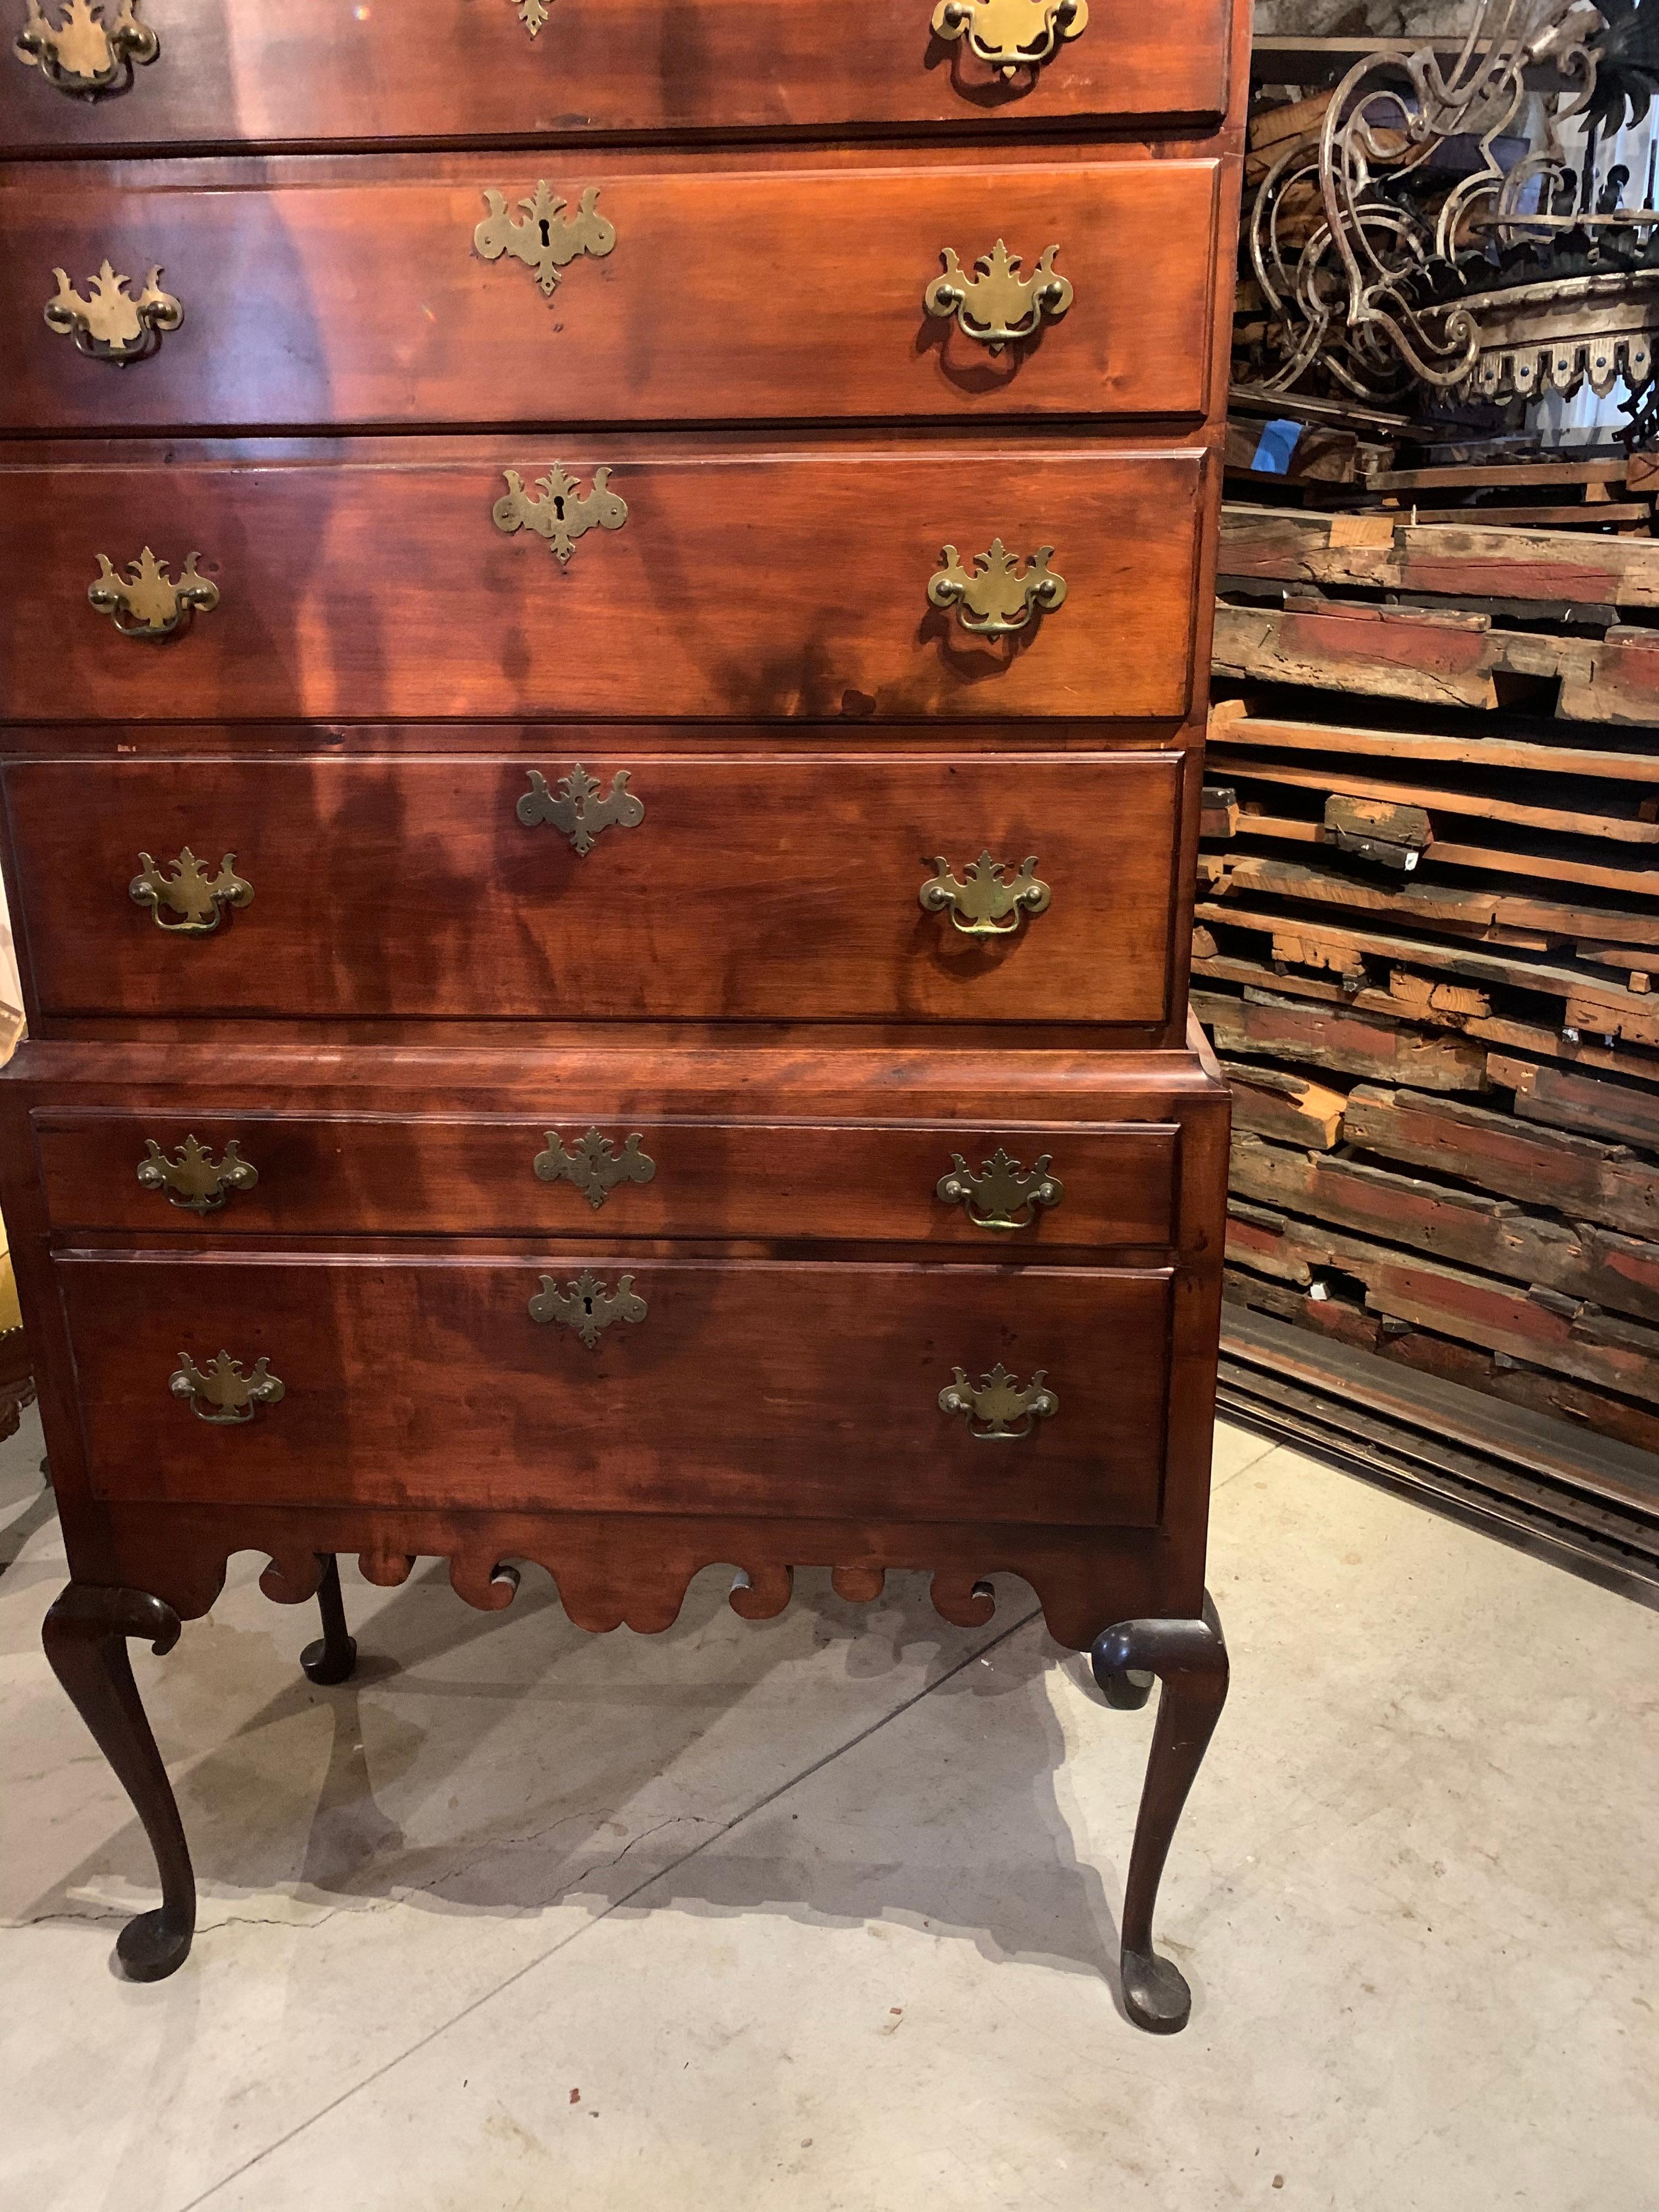 Good period Connecticut highboy. Top and bottom original to one another. Charming lower apron. Queen Ann Cabriole legs.